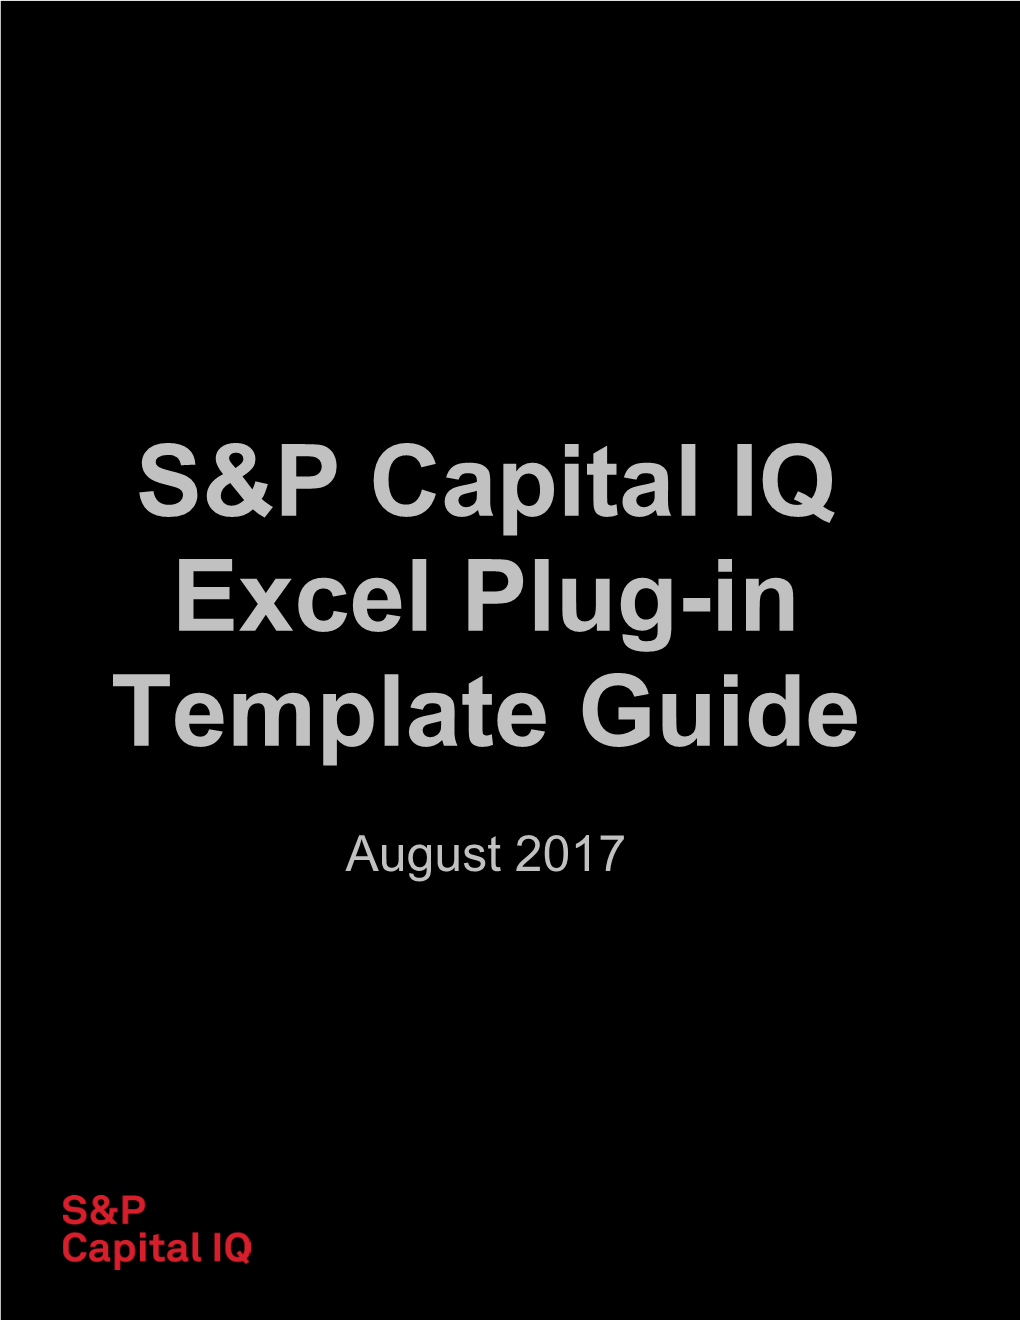 S&P Capital IQ Excel Plug-In Template Guide